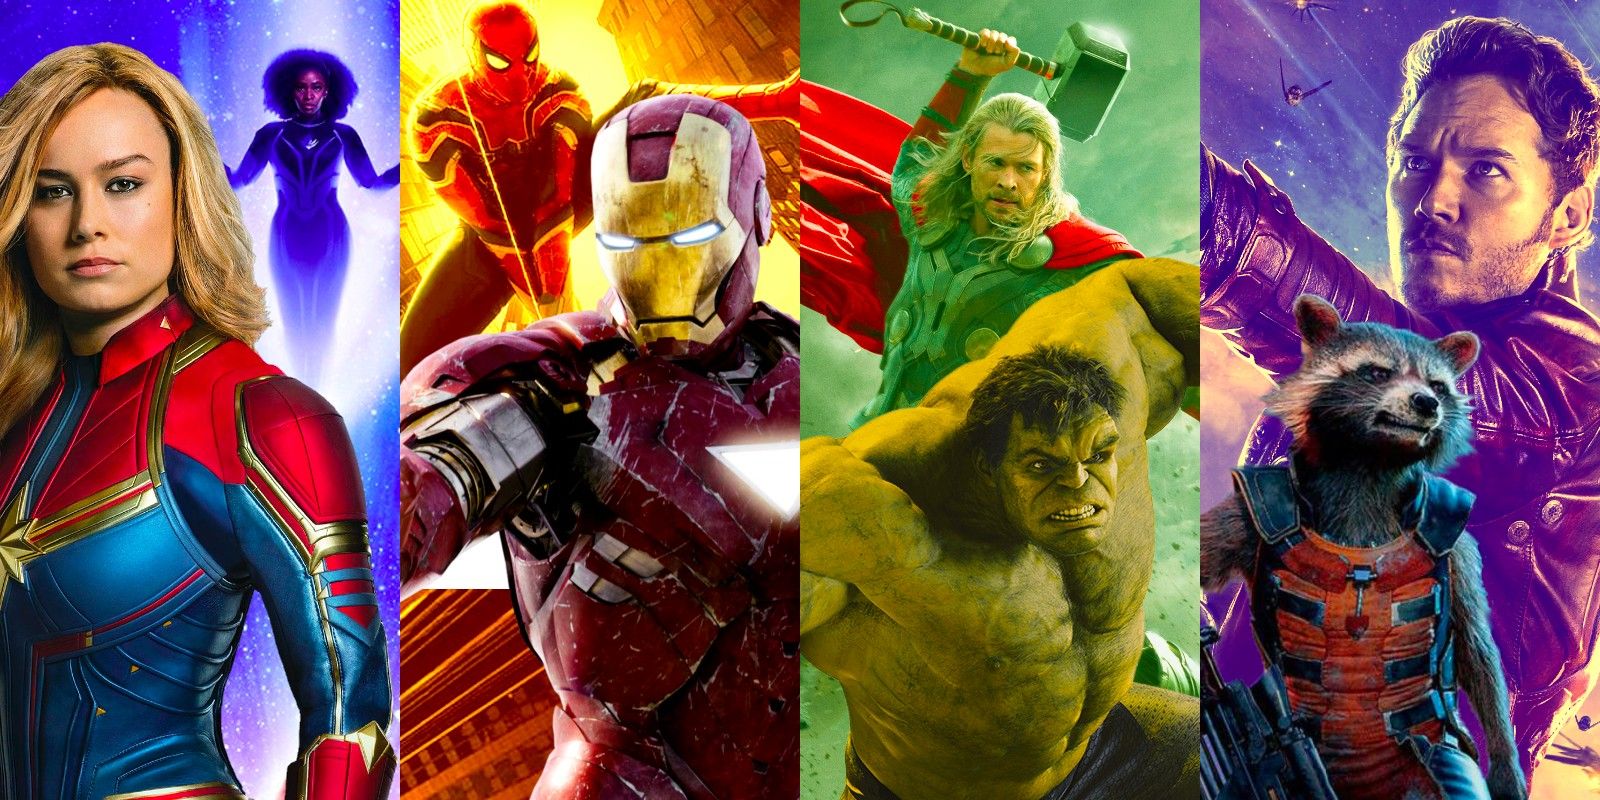 Marvel Movies In Order – How To Watch The Complete MCU Timeline